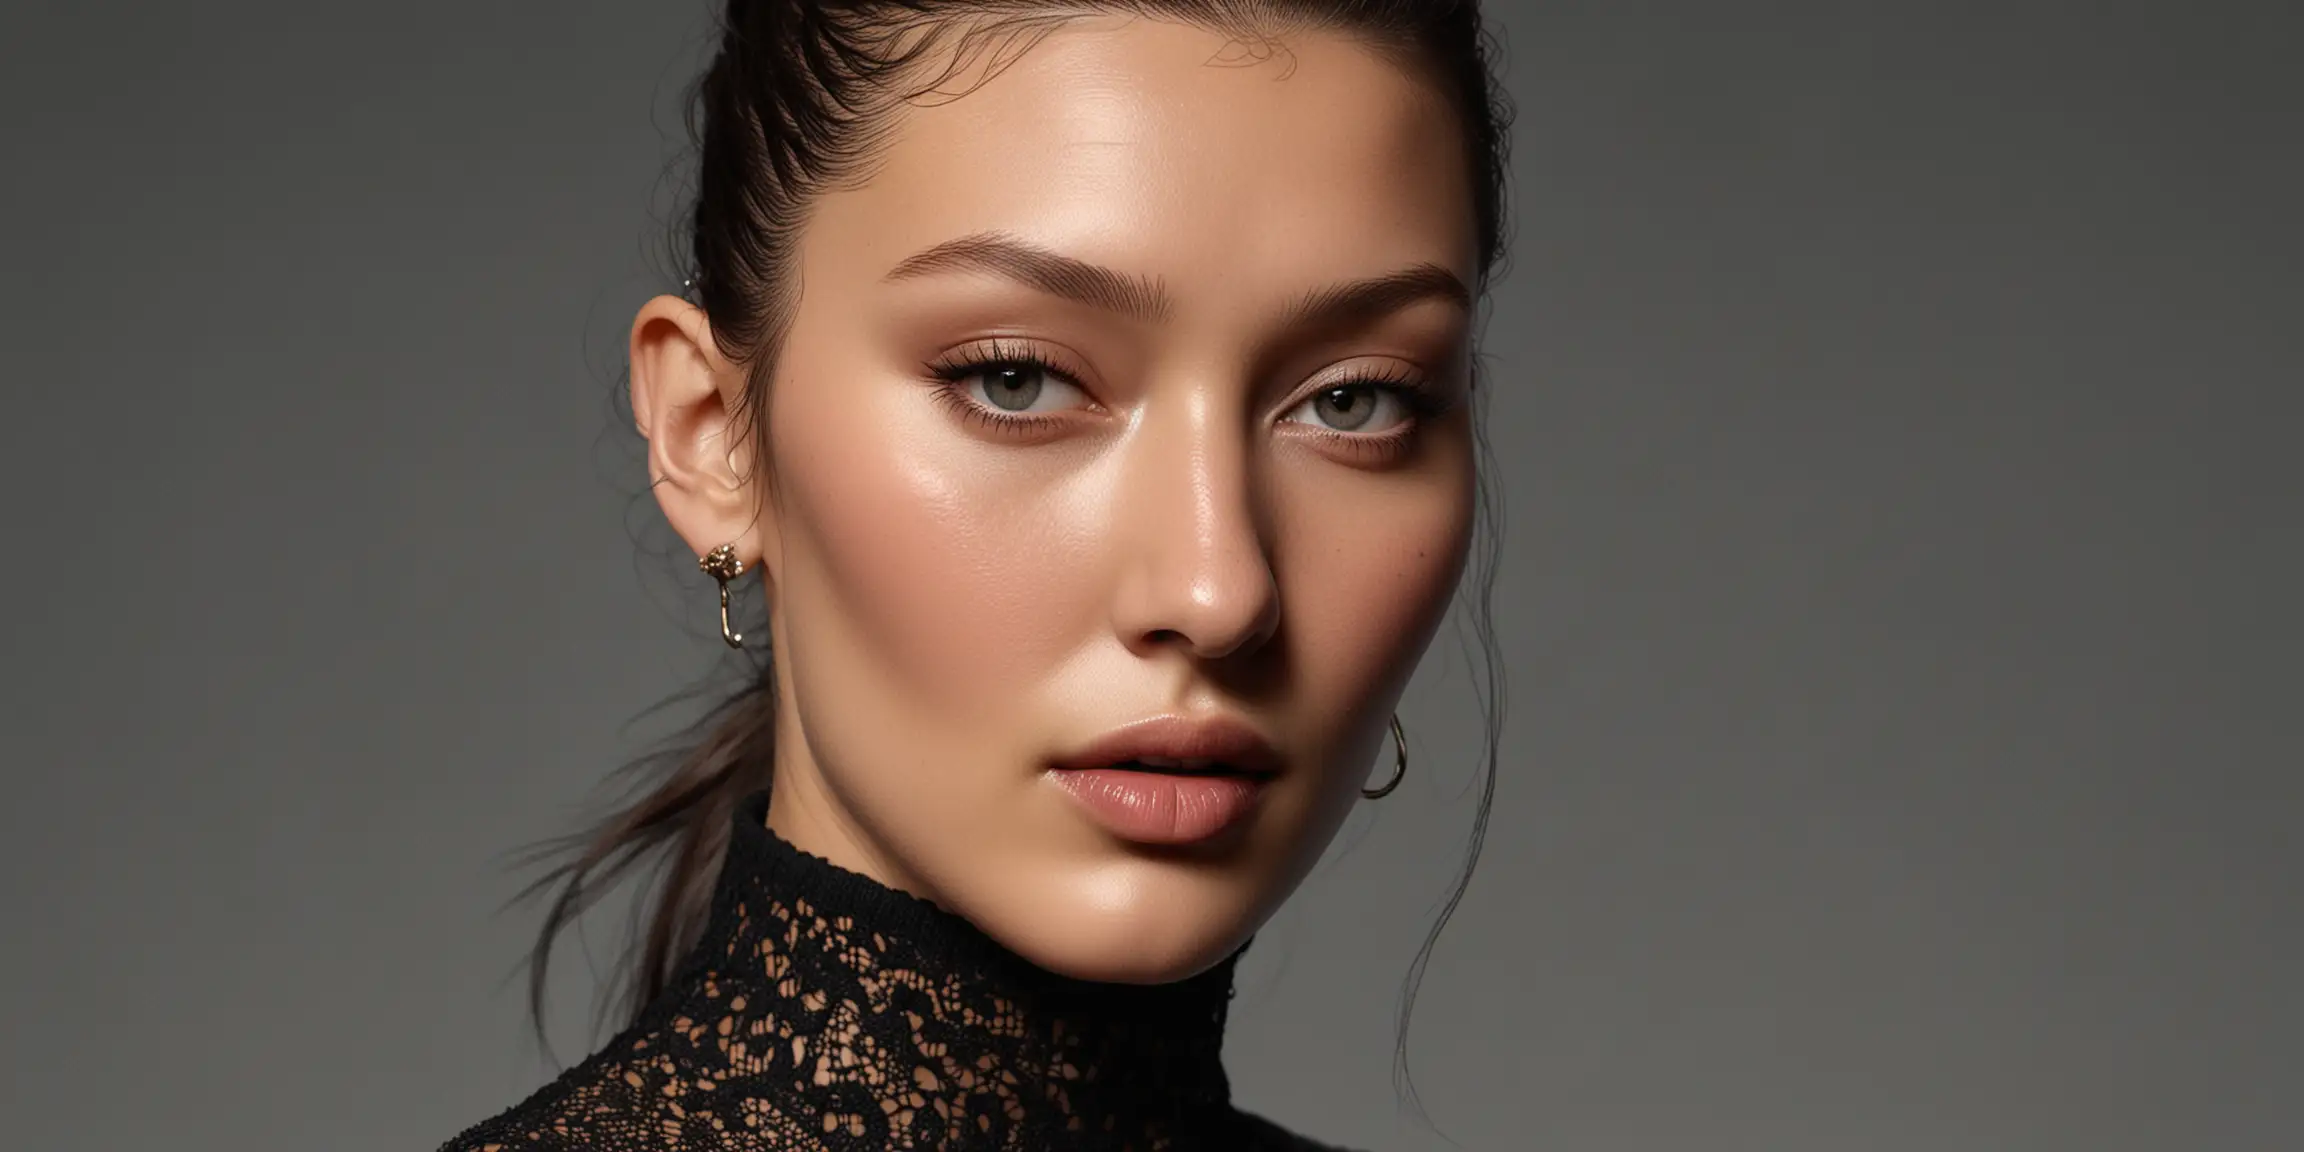 Bella Hadid Dynamic Pose and Detailed Textures in High Resolution Studio Photo